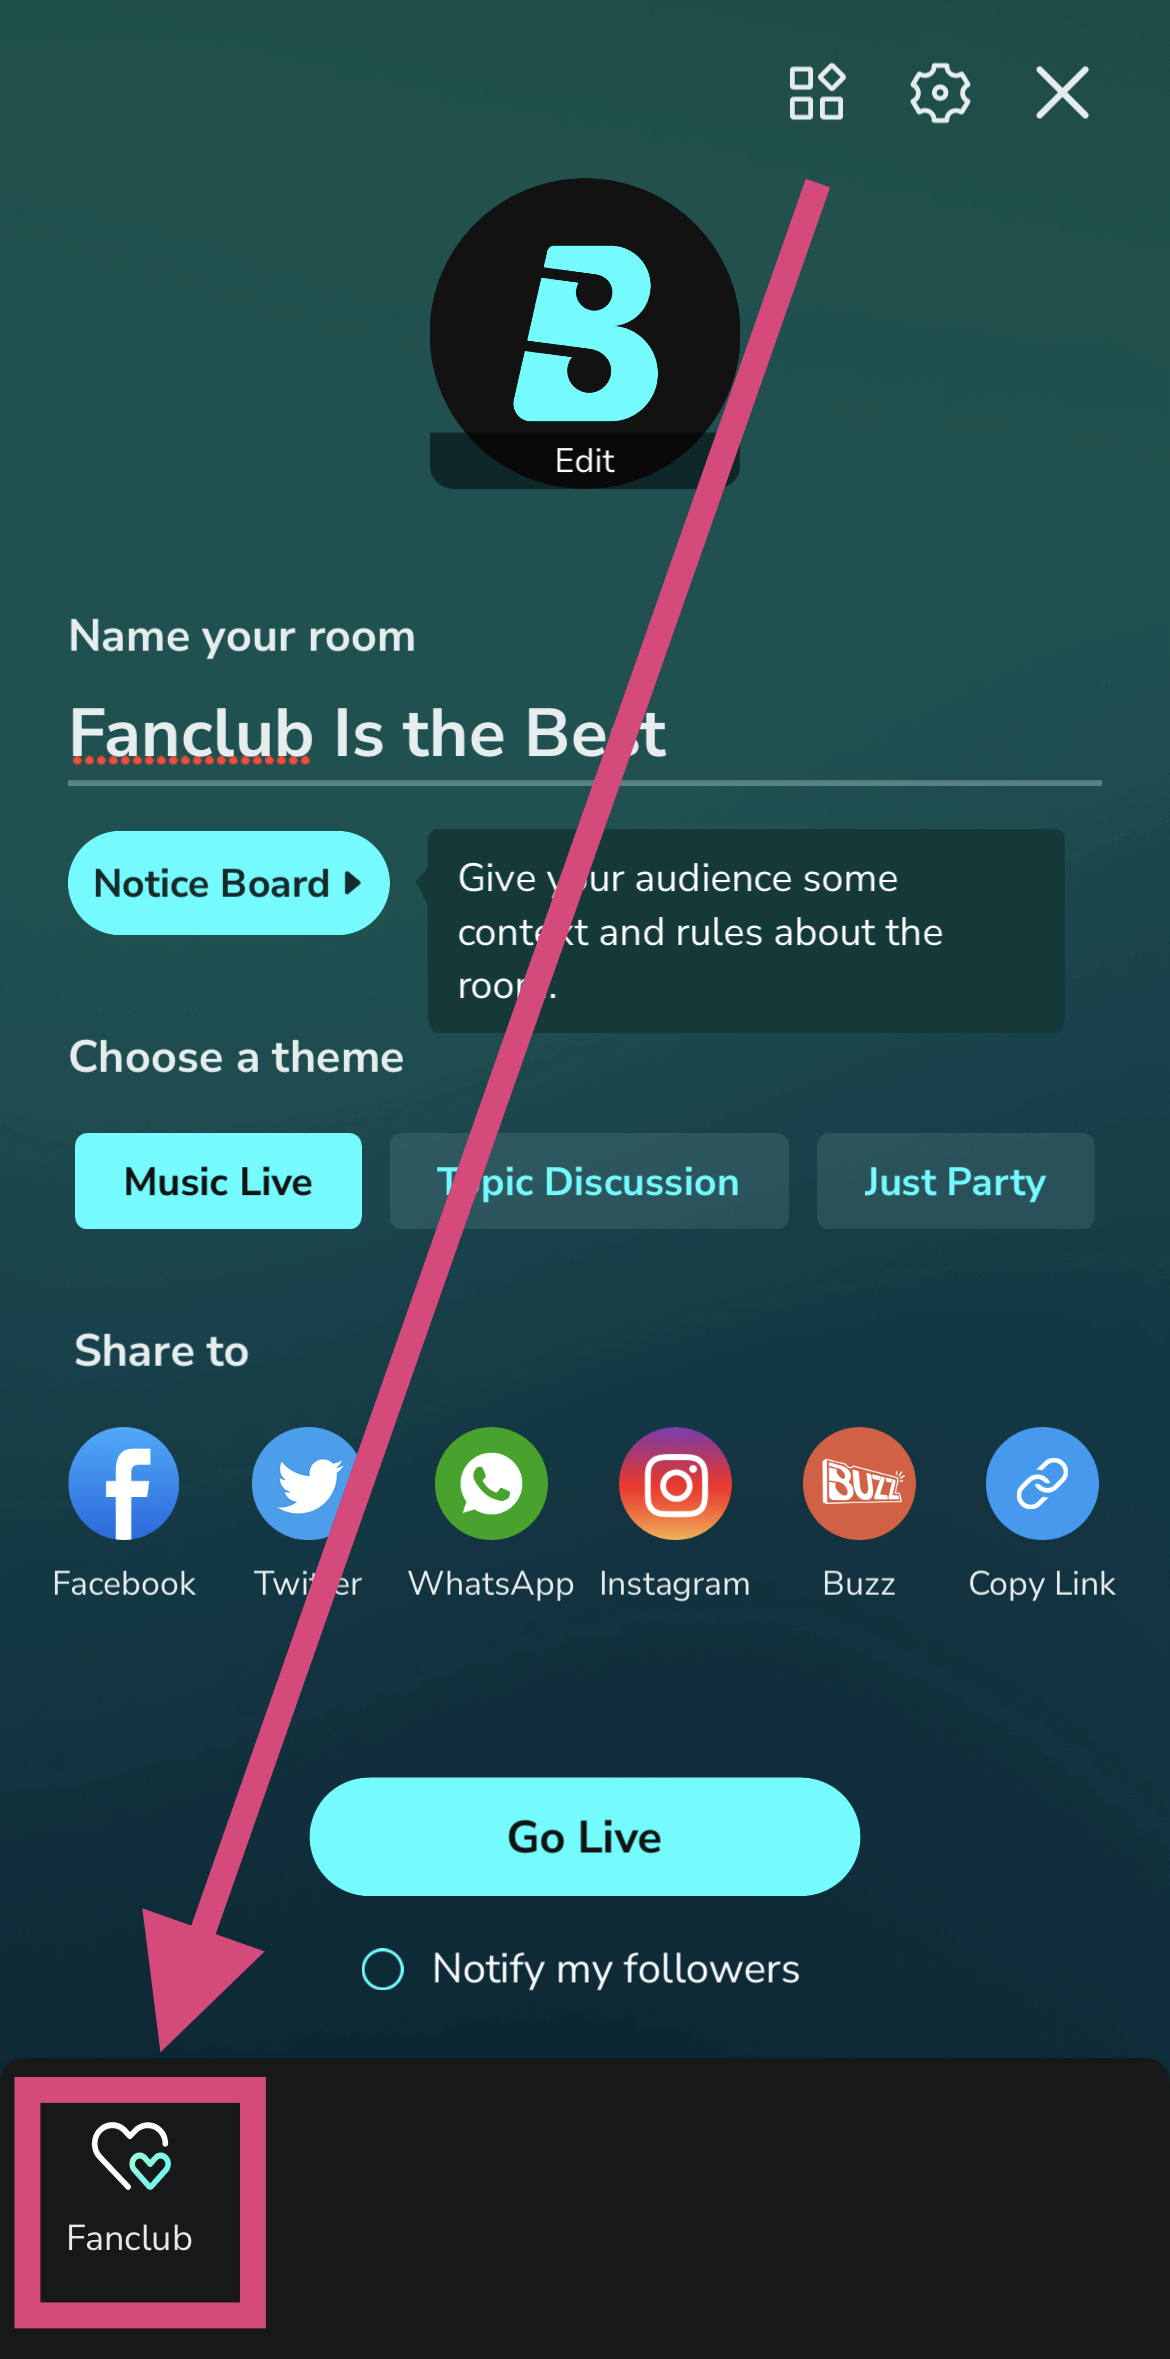 A New Feature Is Here - Fanclub